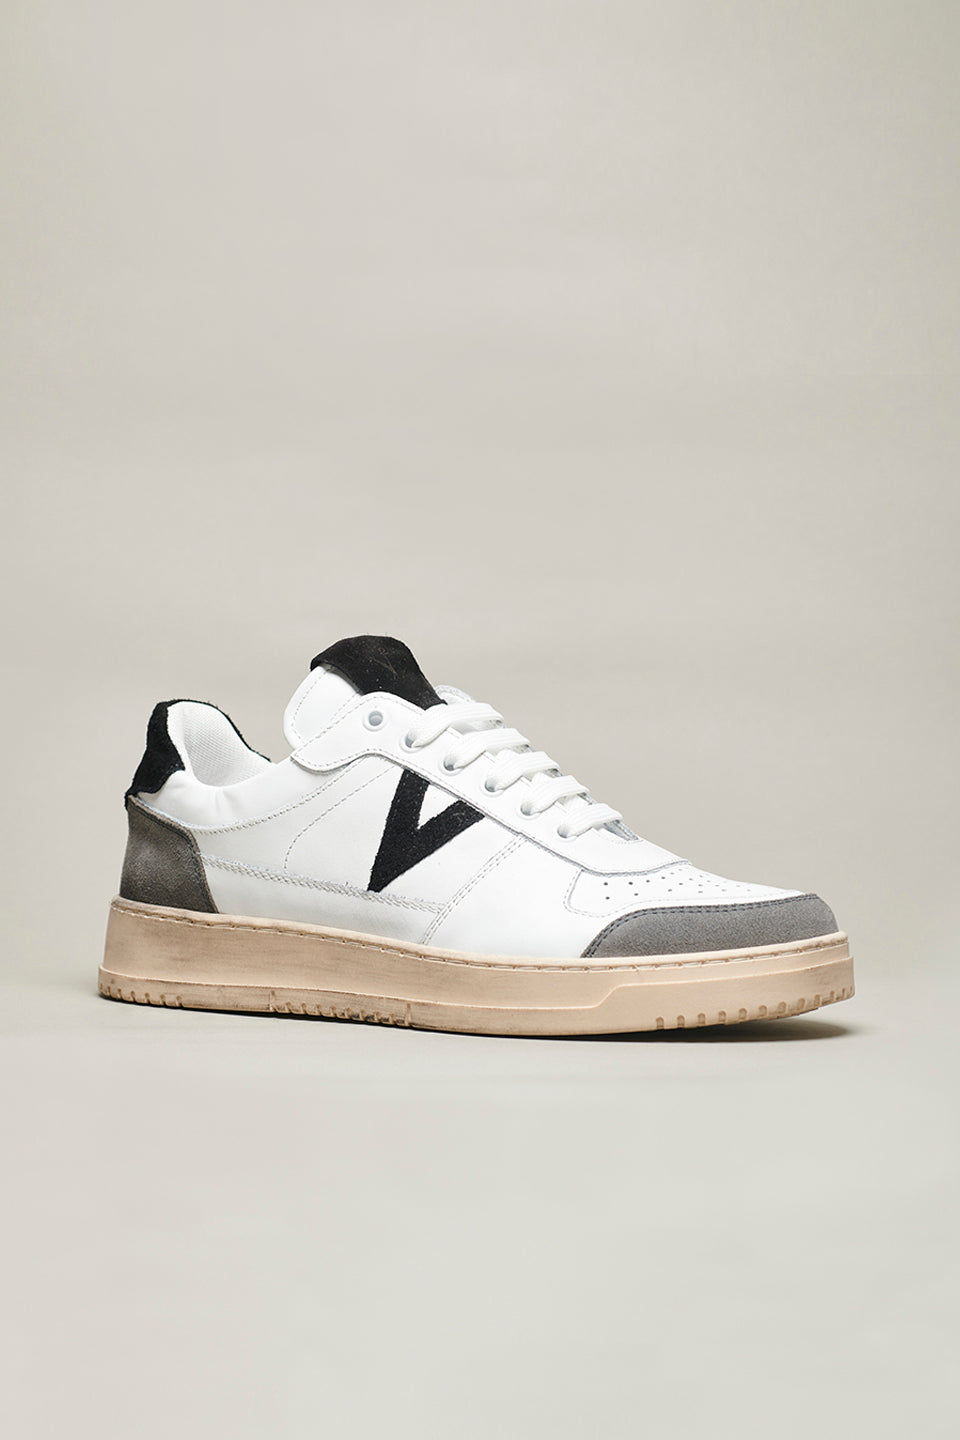 COLLEGE - White sneakers with Black suede back and insert